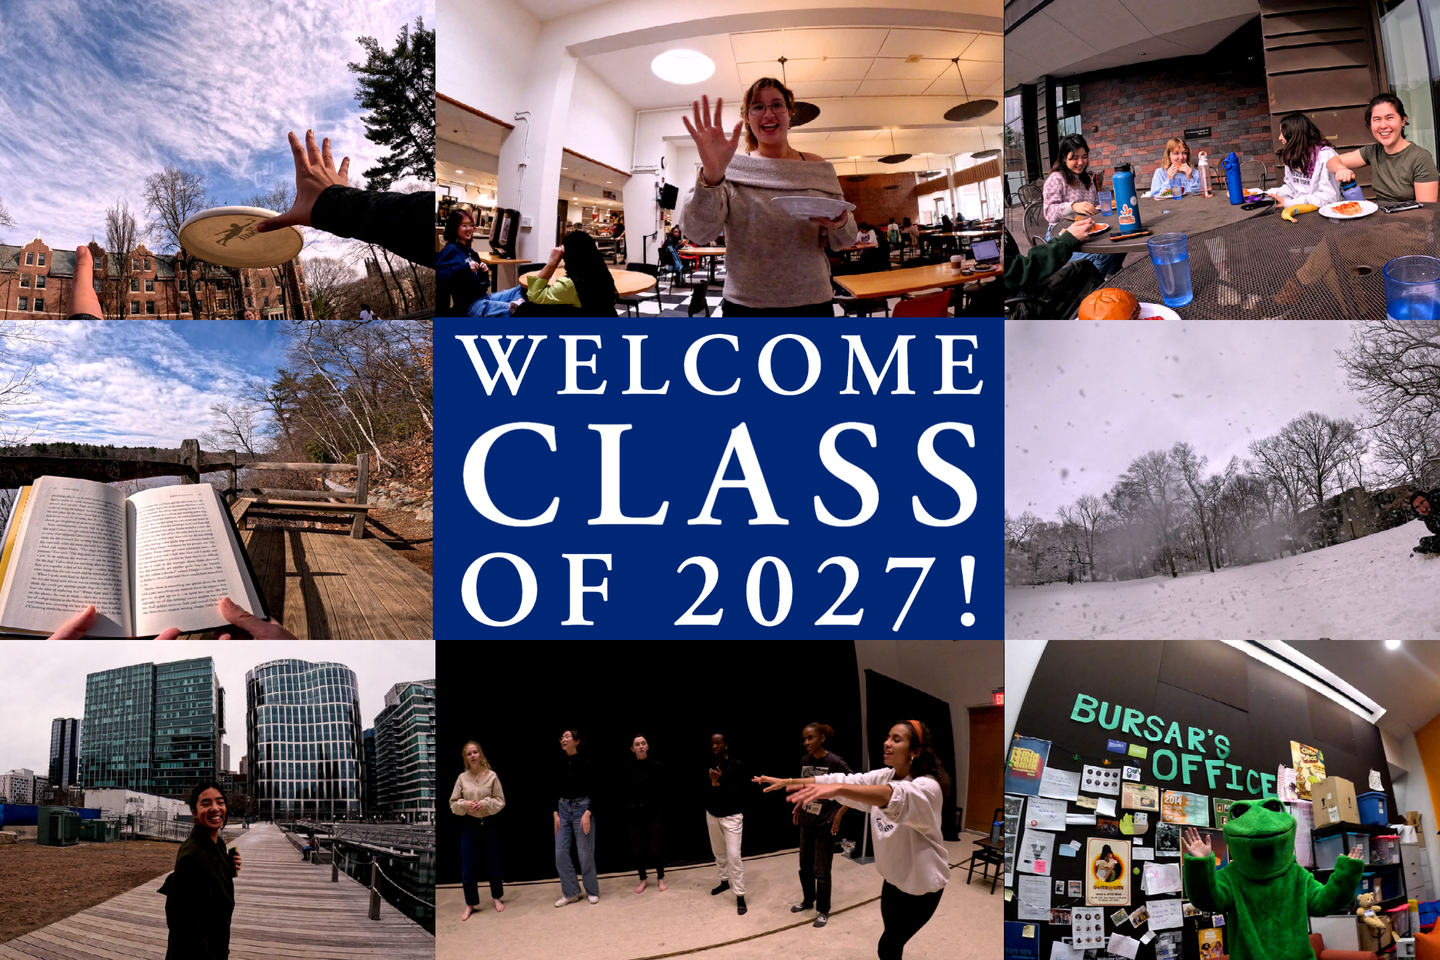 A Welcome Class of 2027 graphic with screen shots from the video showing scenes from campus.